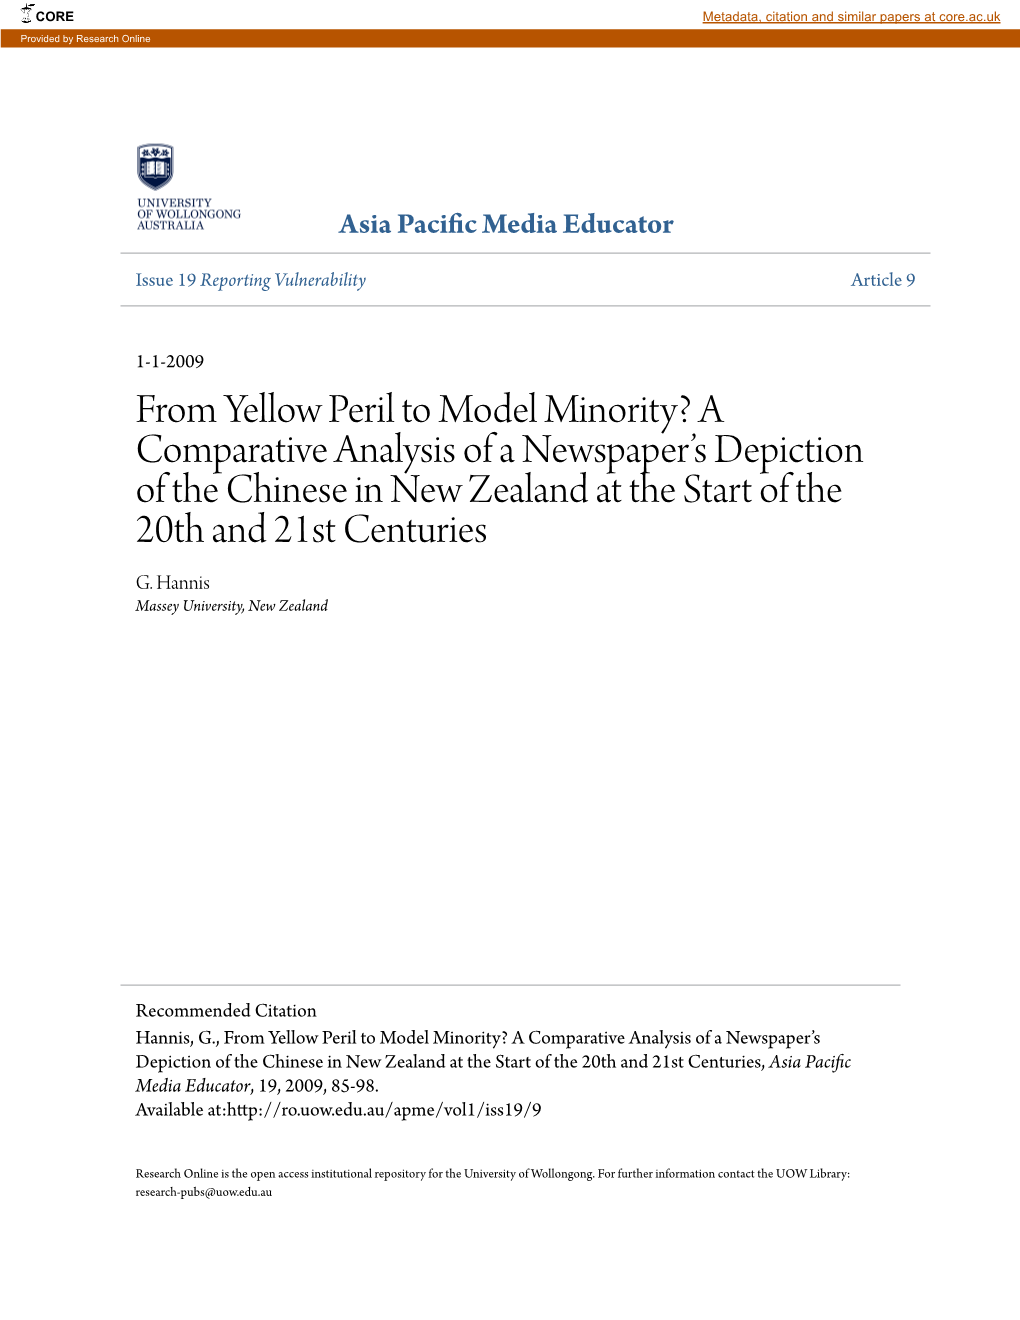 From Yellow Peril to Model Minority? a Comparative Analysis of a Newspaper’S Depiction of the Chinese in New Zealand at the Start of the 20Th and 21St Centuries G